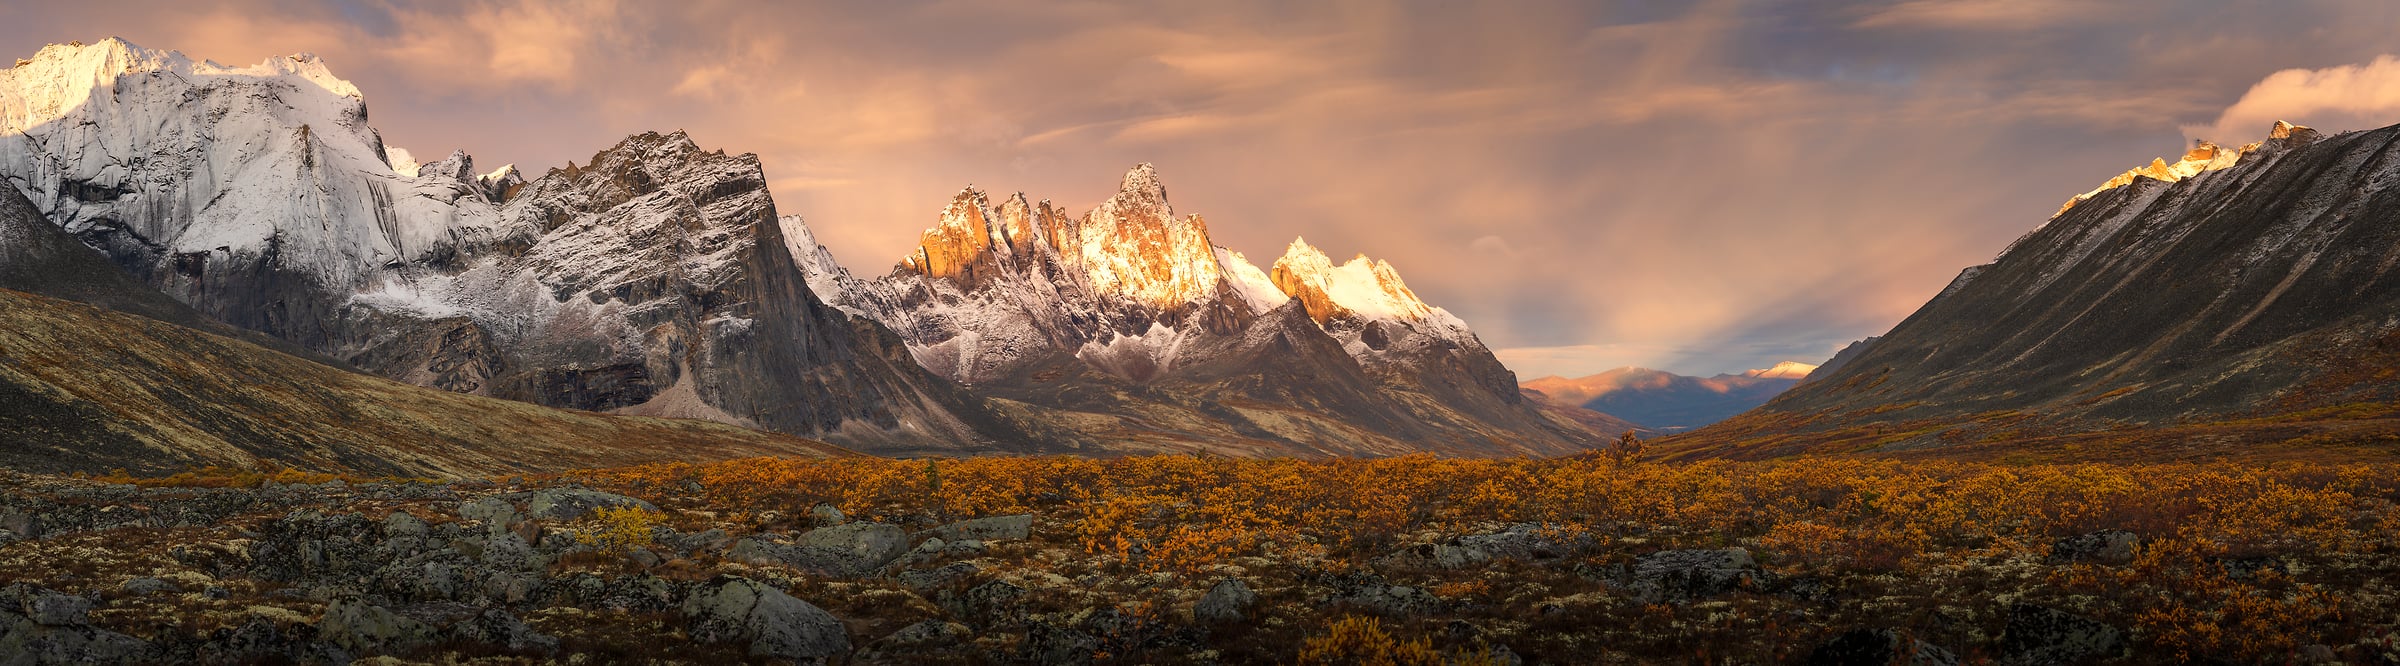 301 megapixels! A very high resolution, large-format VAST photo print of an epic mountain range at sunset; mural wallpaper photograph created by Jeff Lewis in Tombstone Territorial Park, Yukon, Canada.